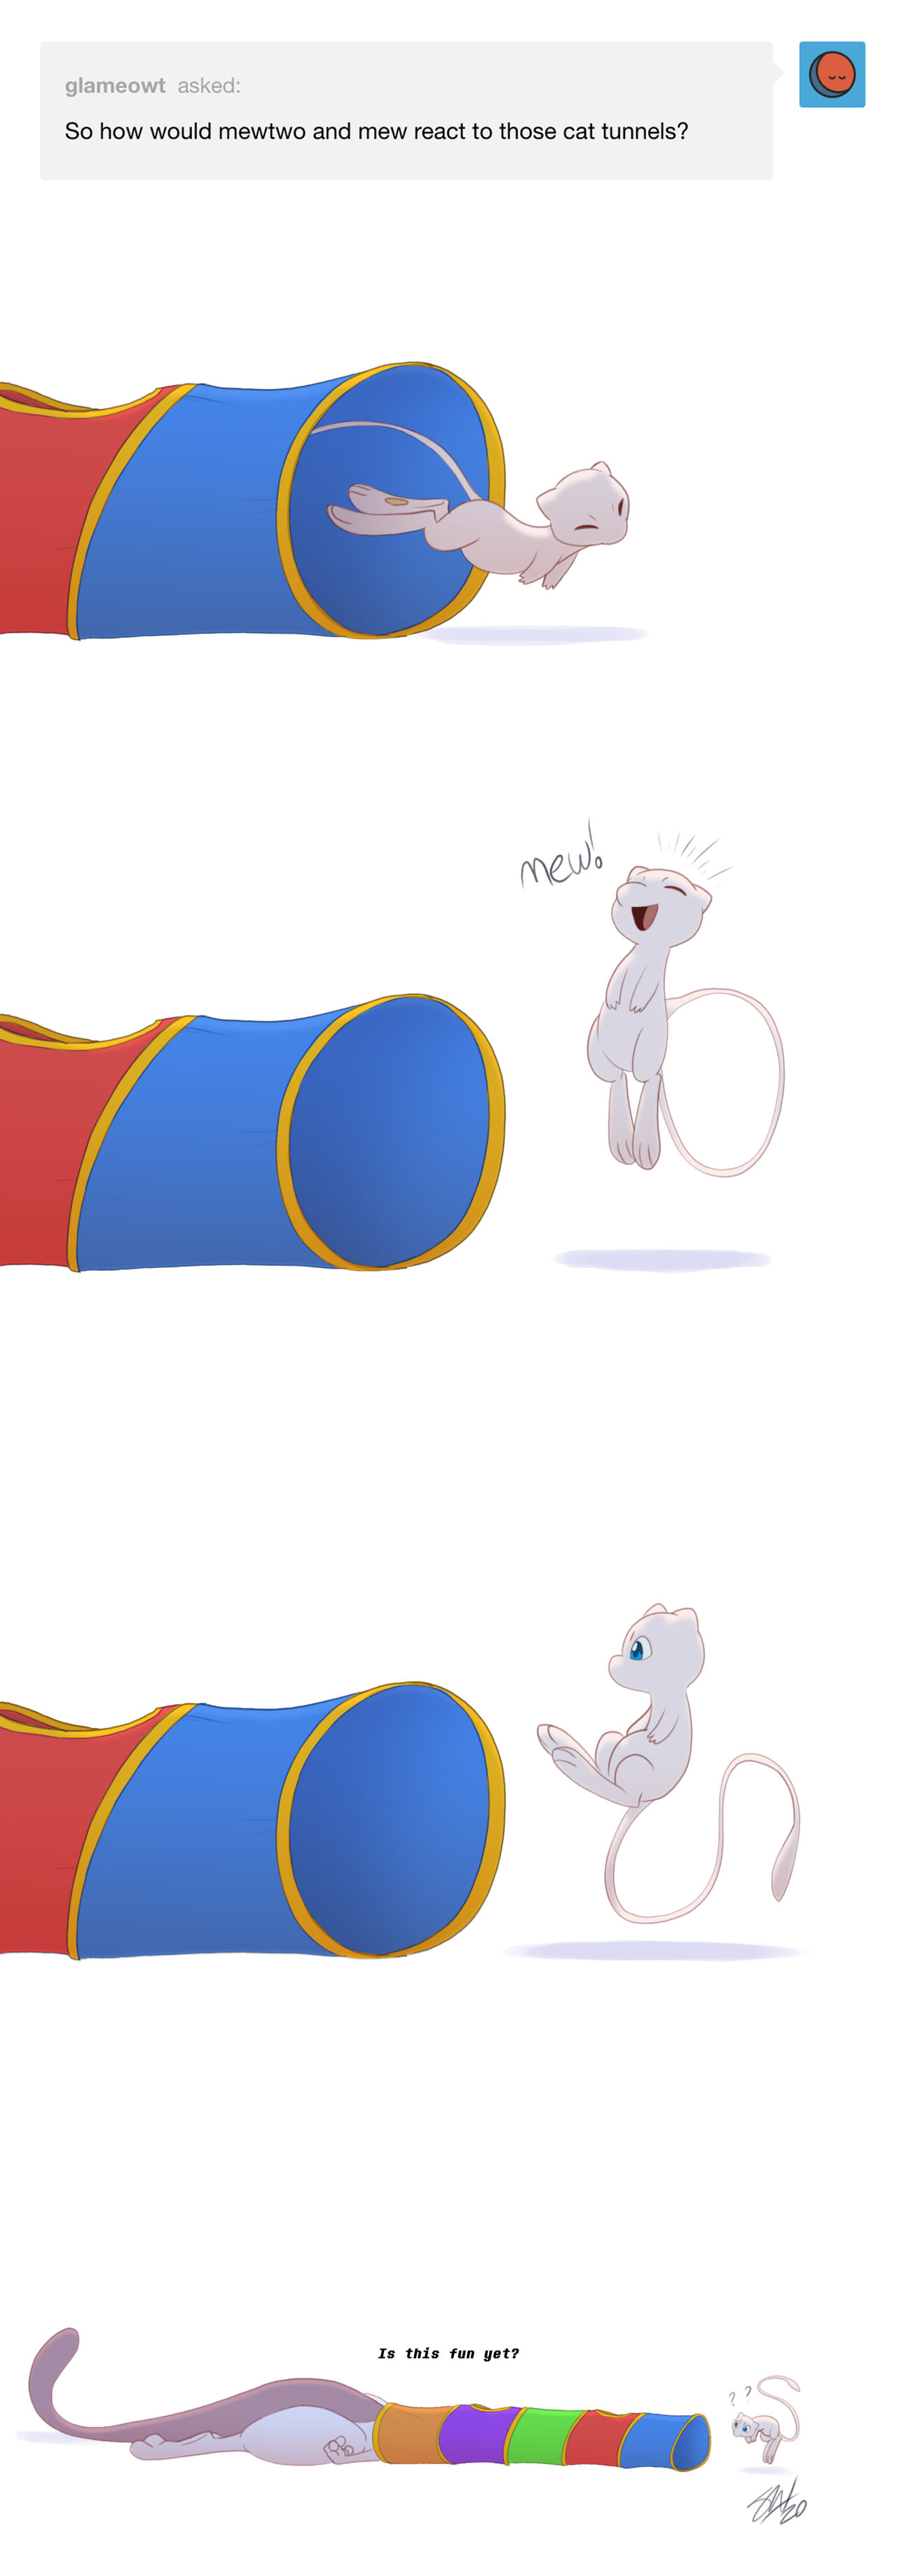 How to Catch Ancient Mew in Pokemon Red and Blue by icycatelf on DeviantArt